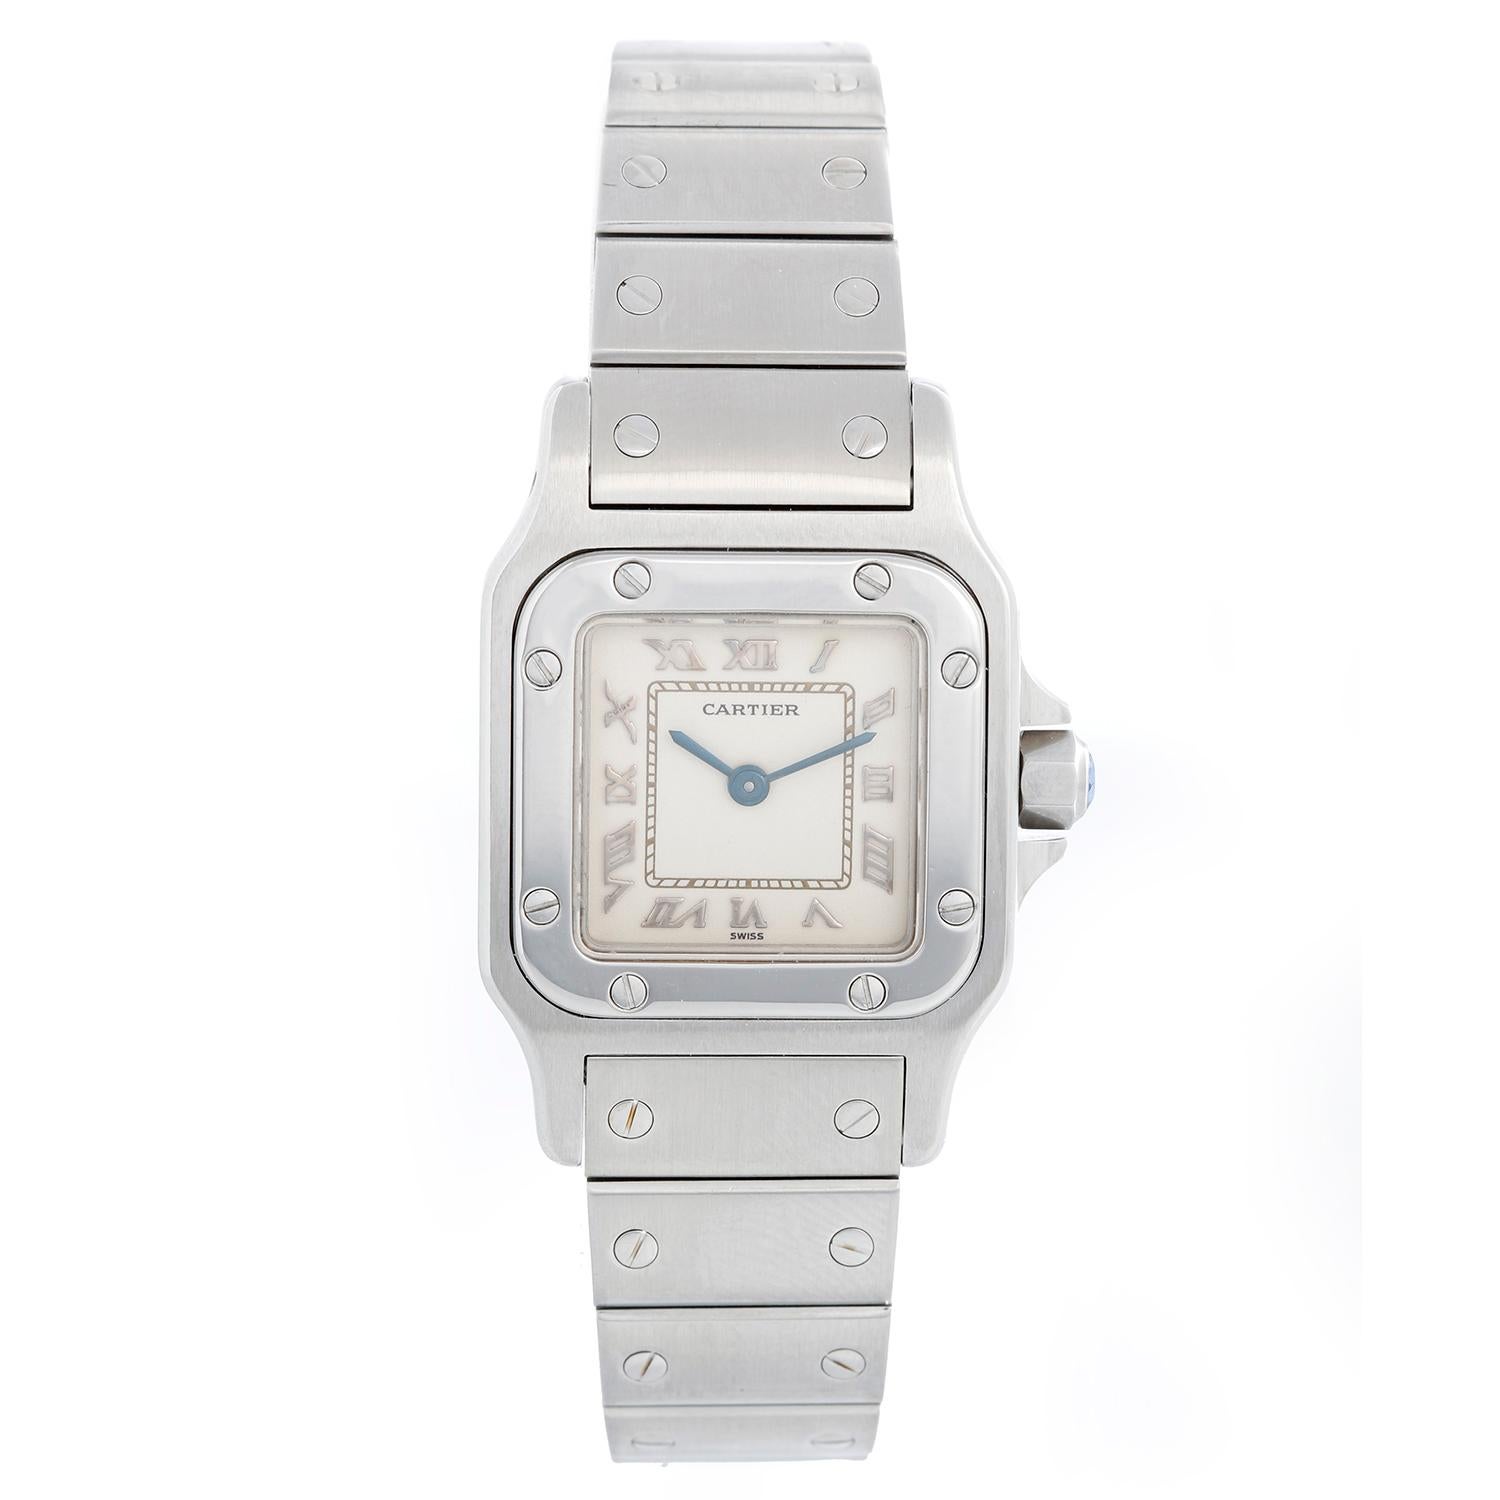 Cartier Santos Galbee Small Ladies Watch Roman Numerals 1565 - Quartz. Stainless steel case (24mm x 35mm). White dial with steel roman numerals. Stainless steel Santos bracelet; will fit a 6 1/2 inch wrist . Pre-owned with custom box. 